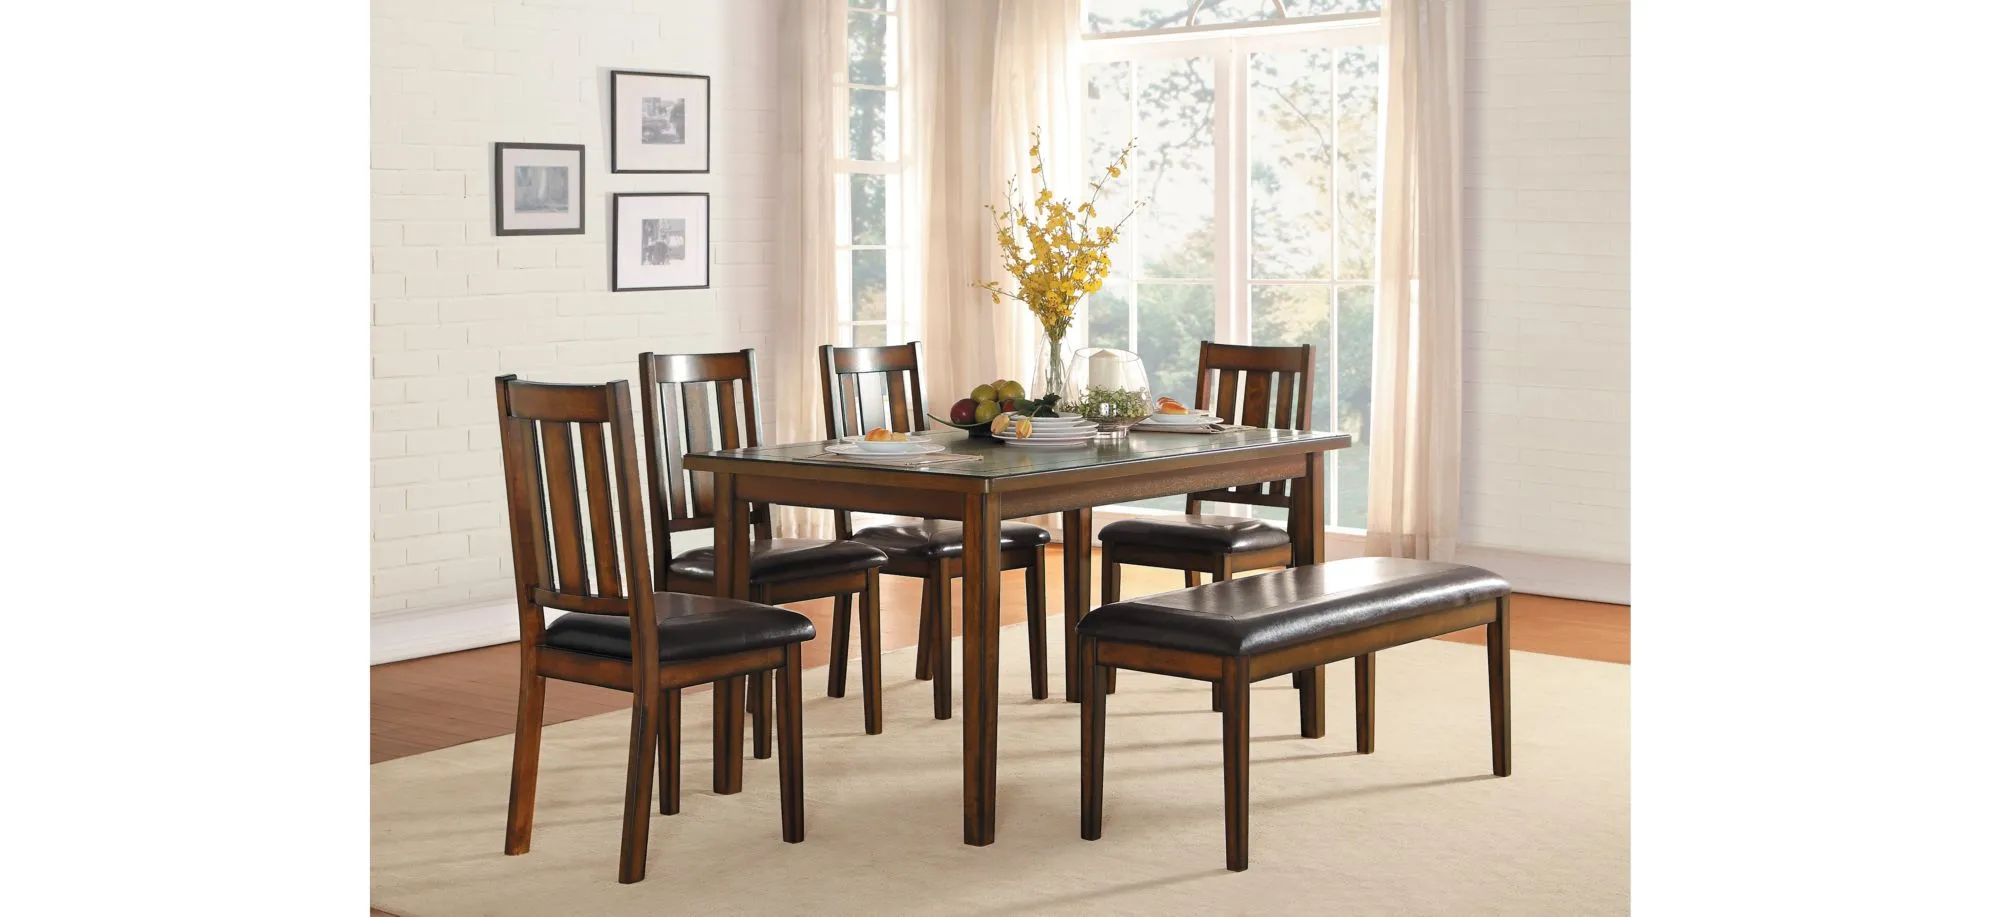 Normand 6-pc. Dining Set in Brown by Homelegance